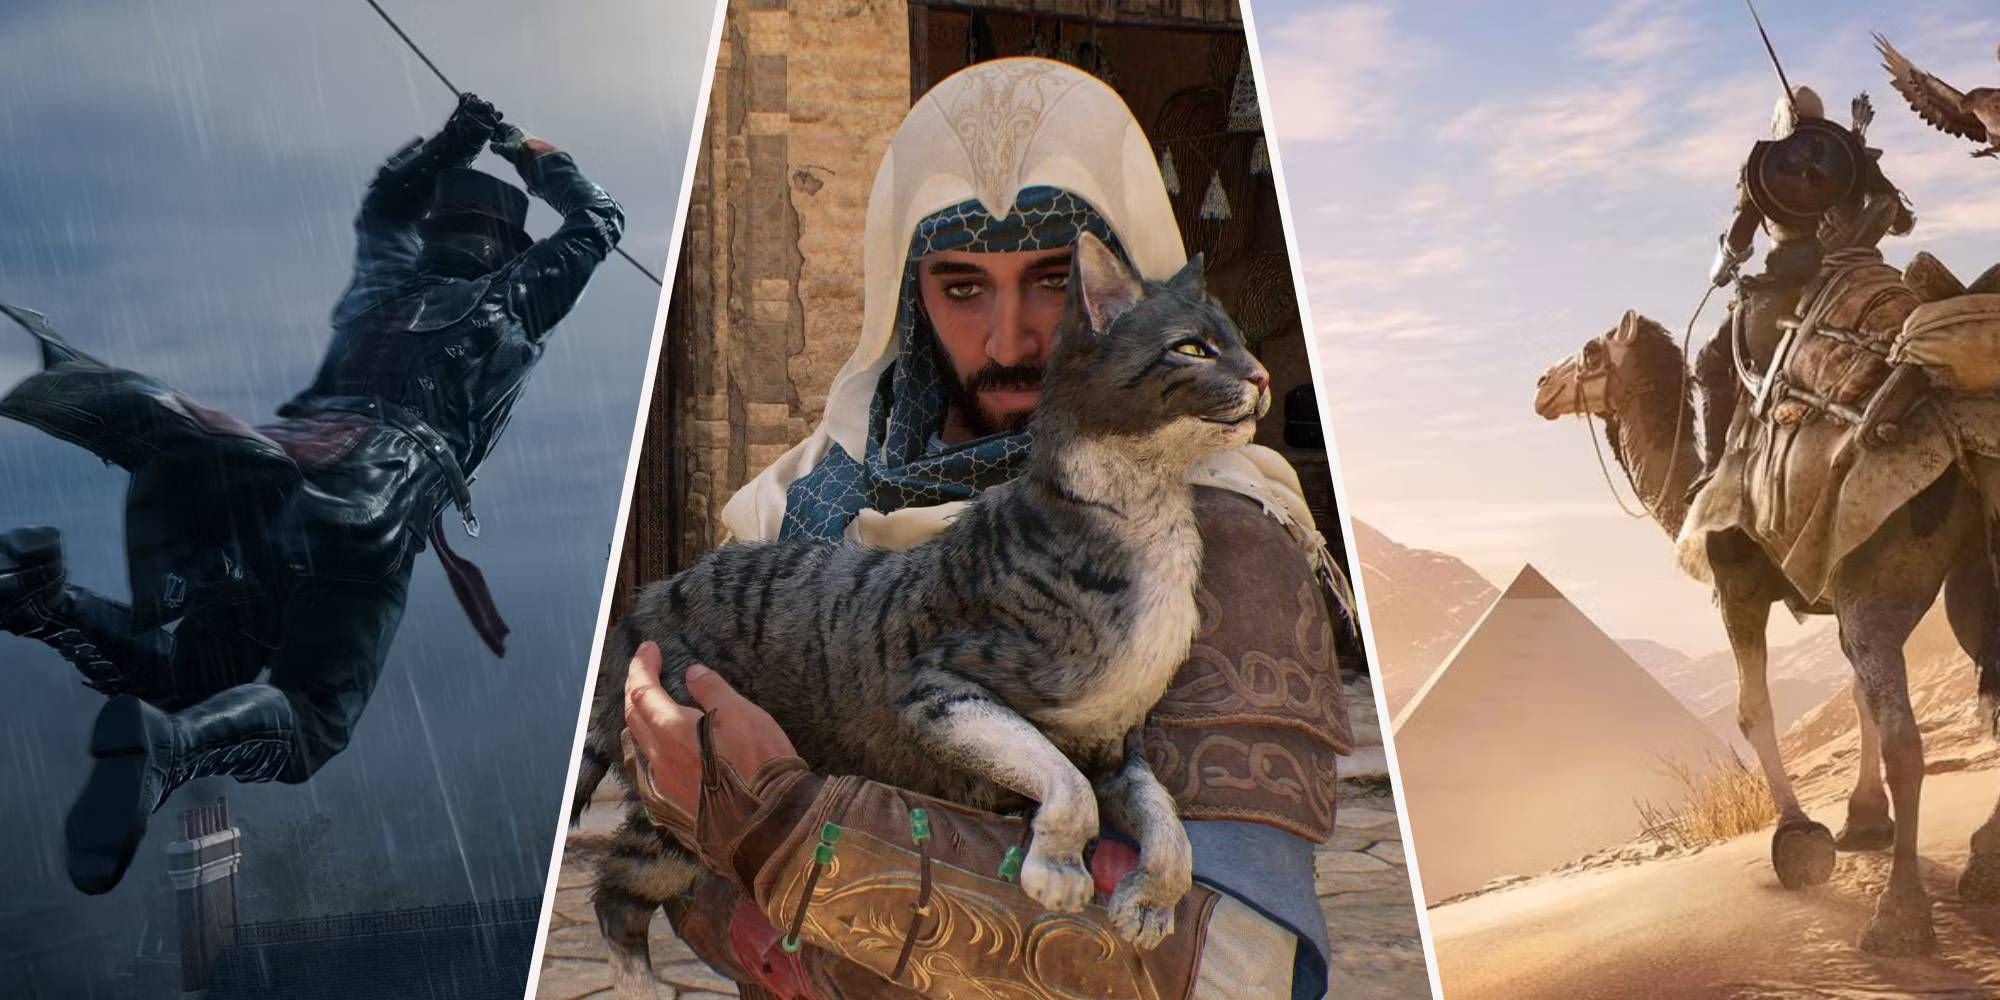 Assassin's Creed Origins has its sights set on The Witcher's RPG crown